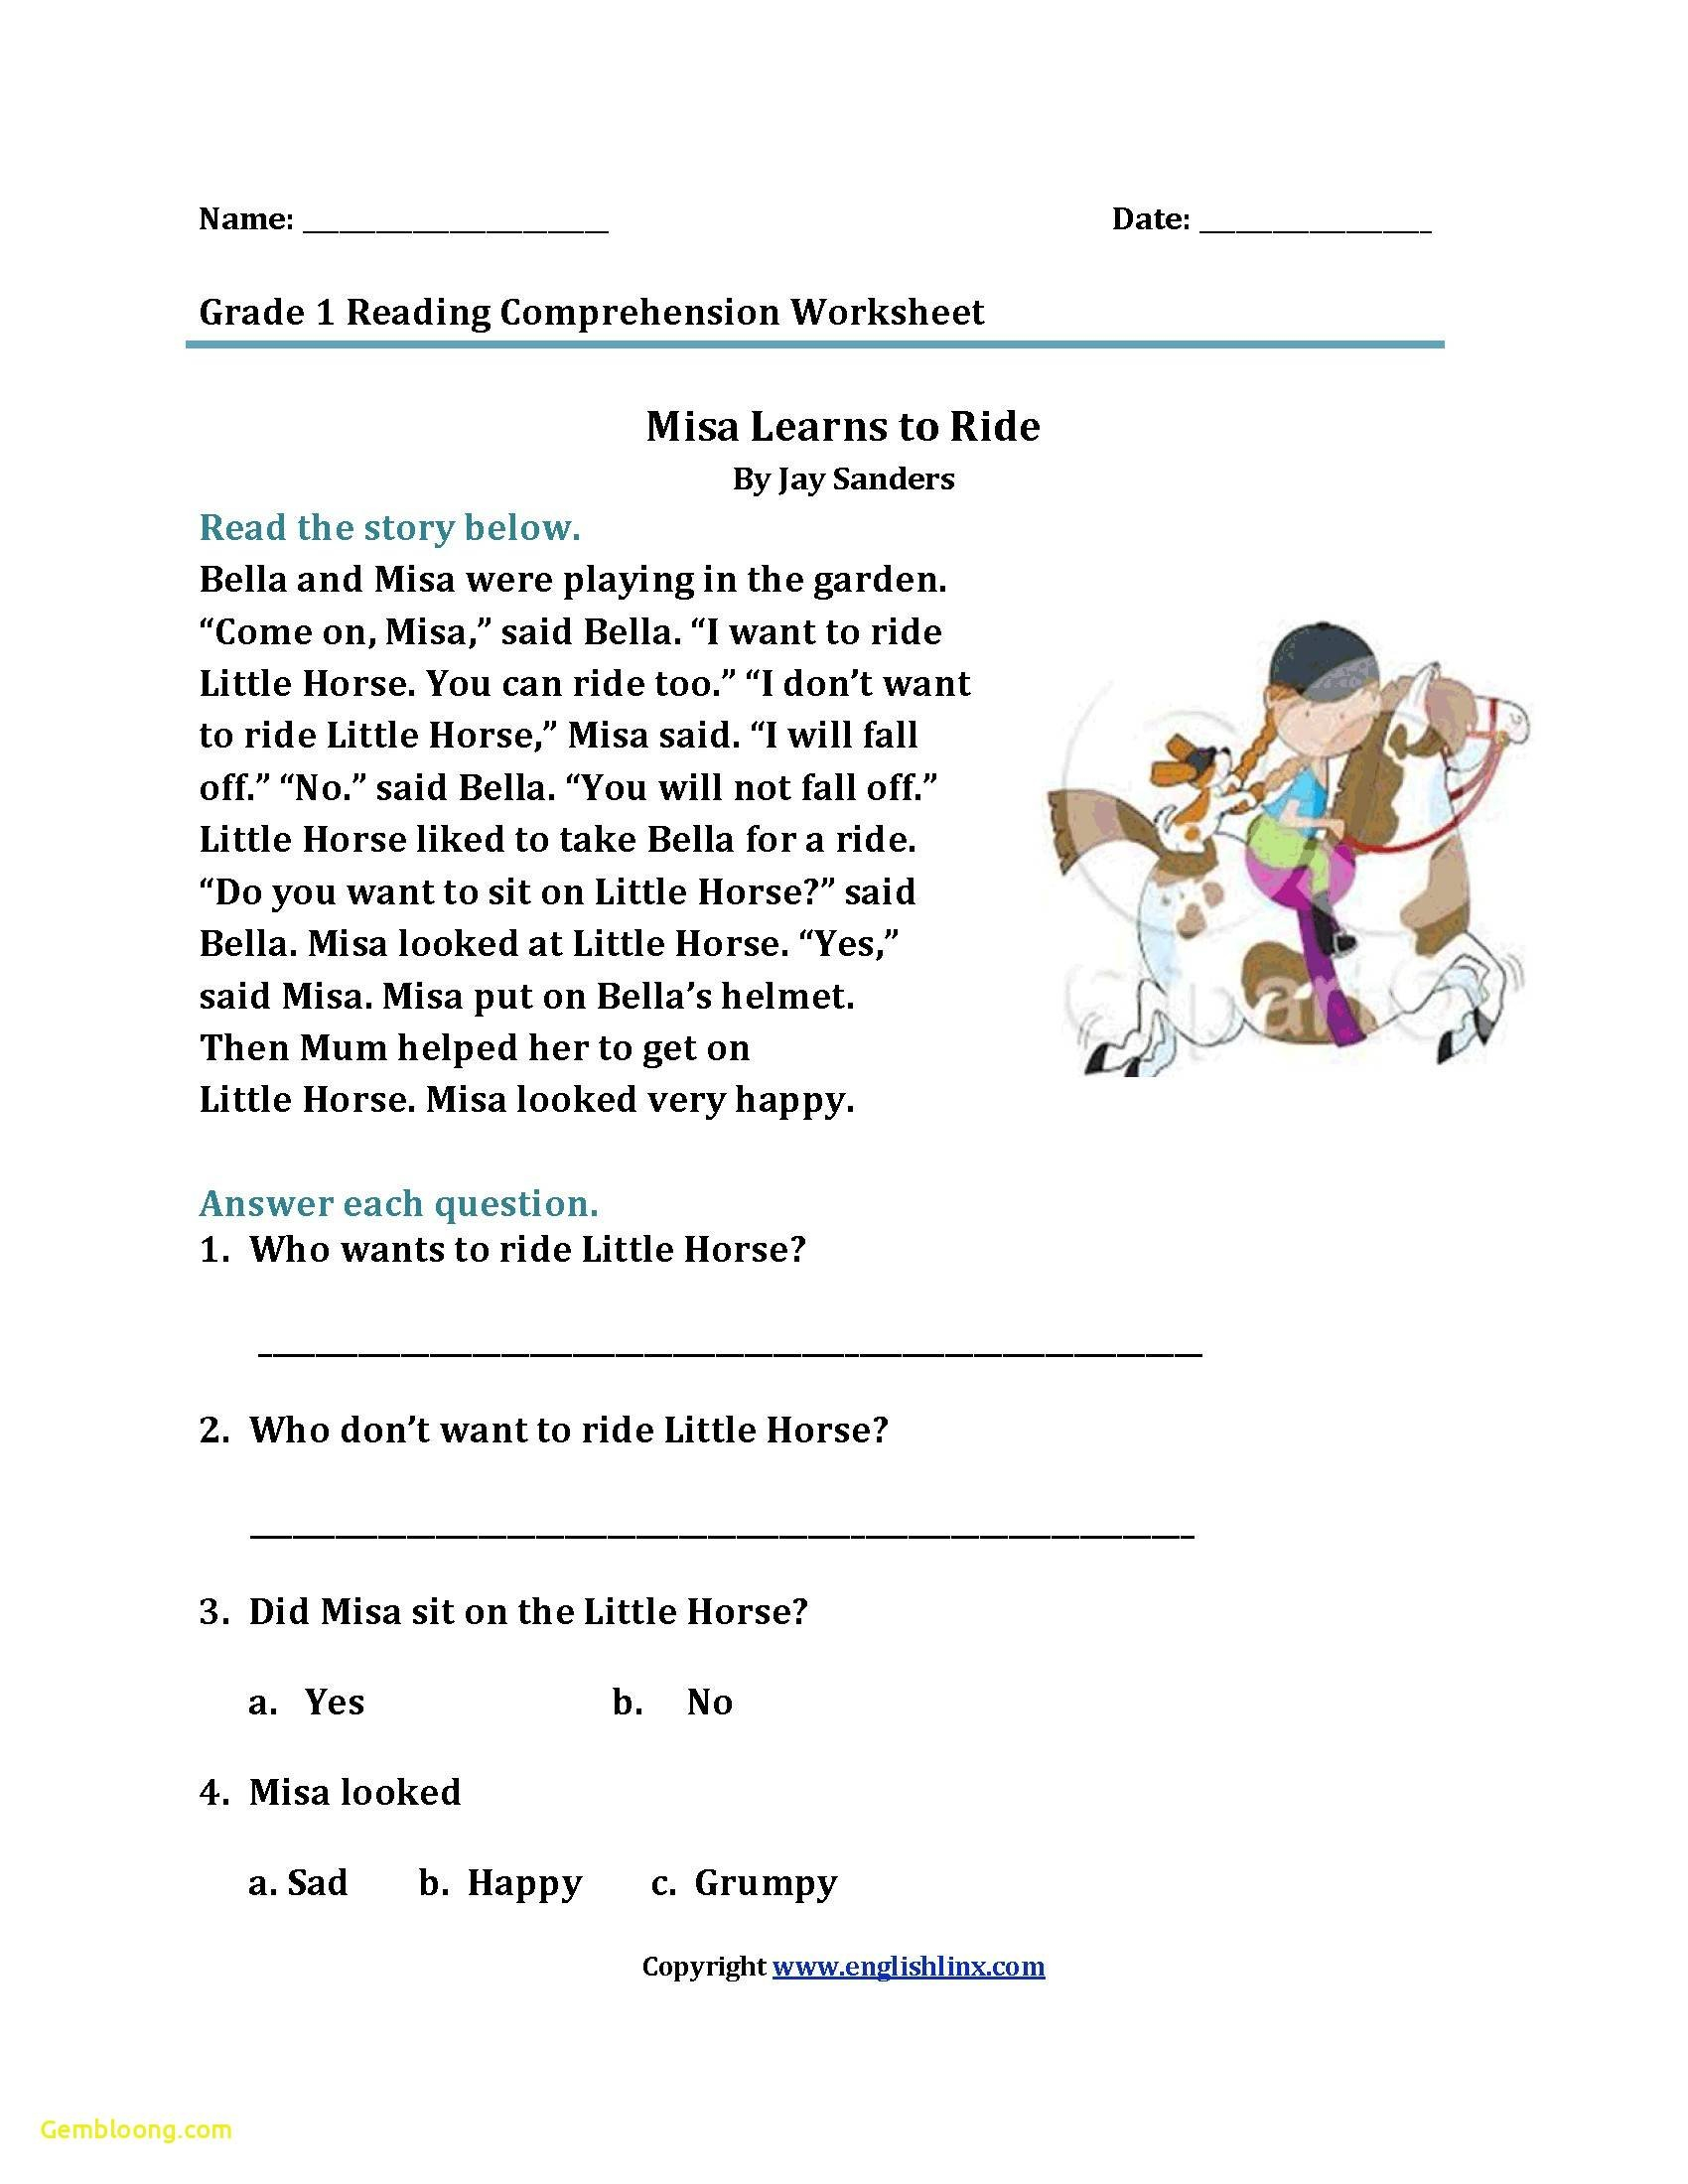 Reading Comprehension Worksheets For 1St Grade  Cramerforcongress As Well As Year 1 Reading Comprehension Worksheets Free